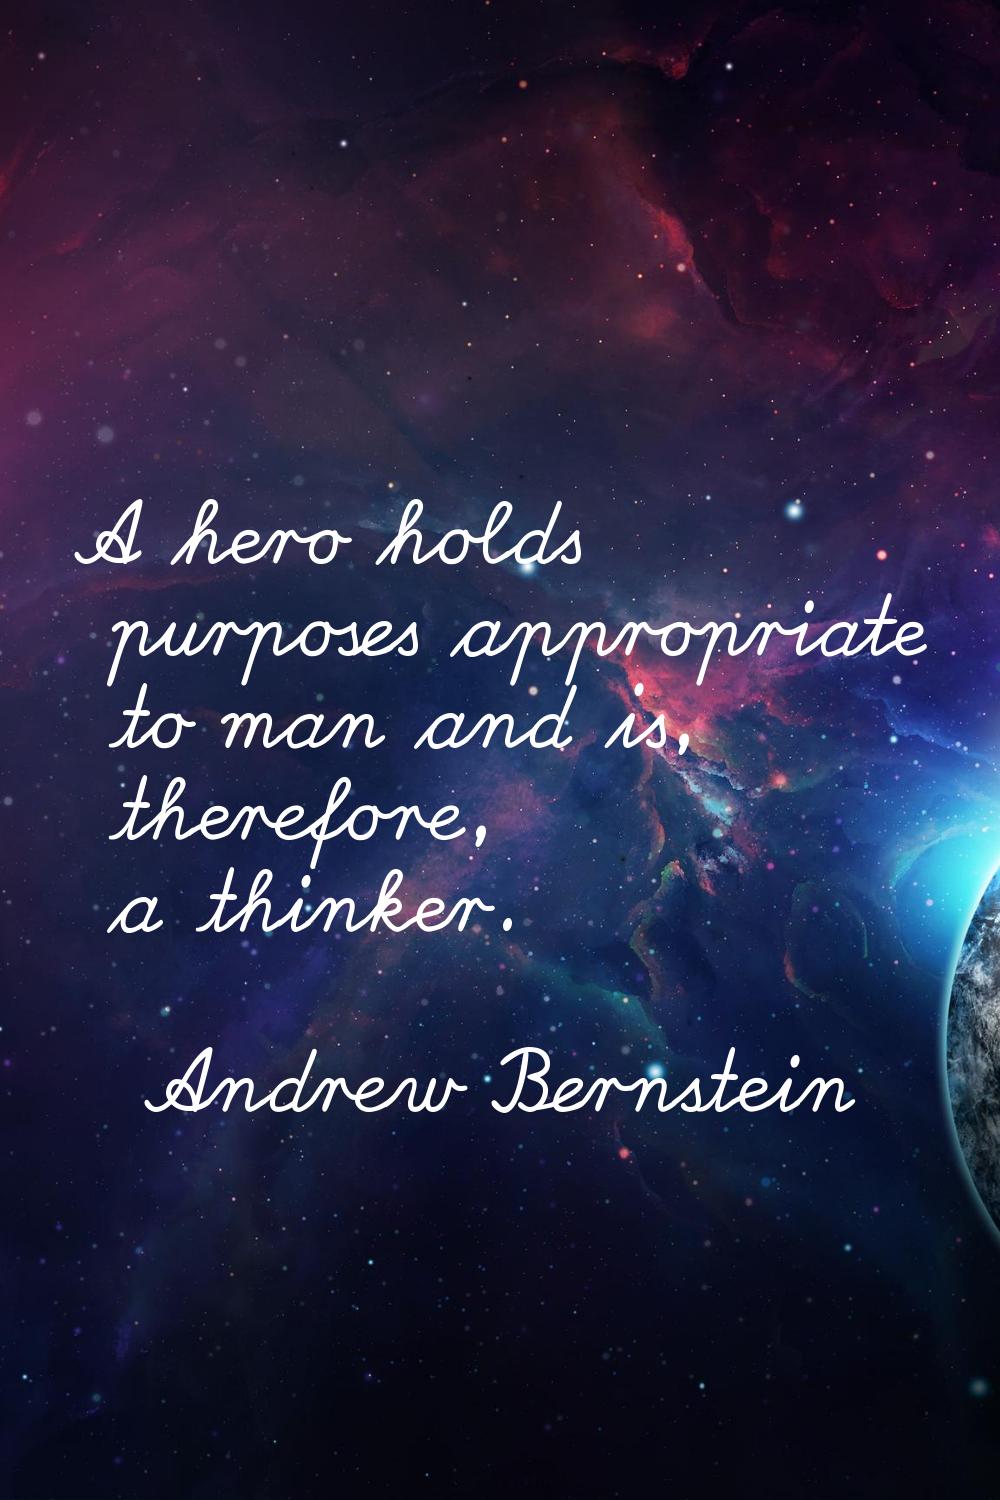 A hero holds purposes appropriate to man and is, therefore, a thinker.